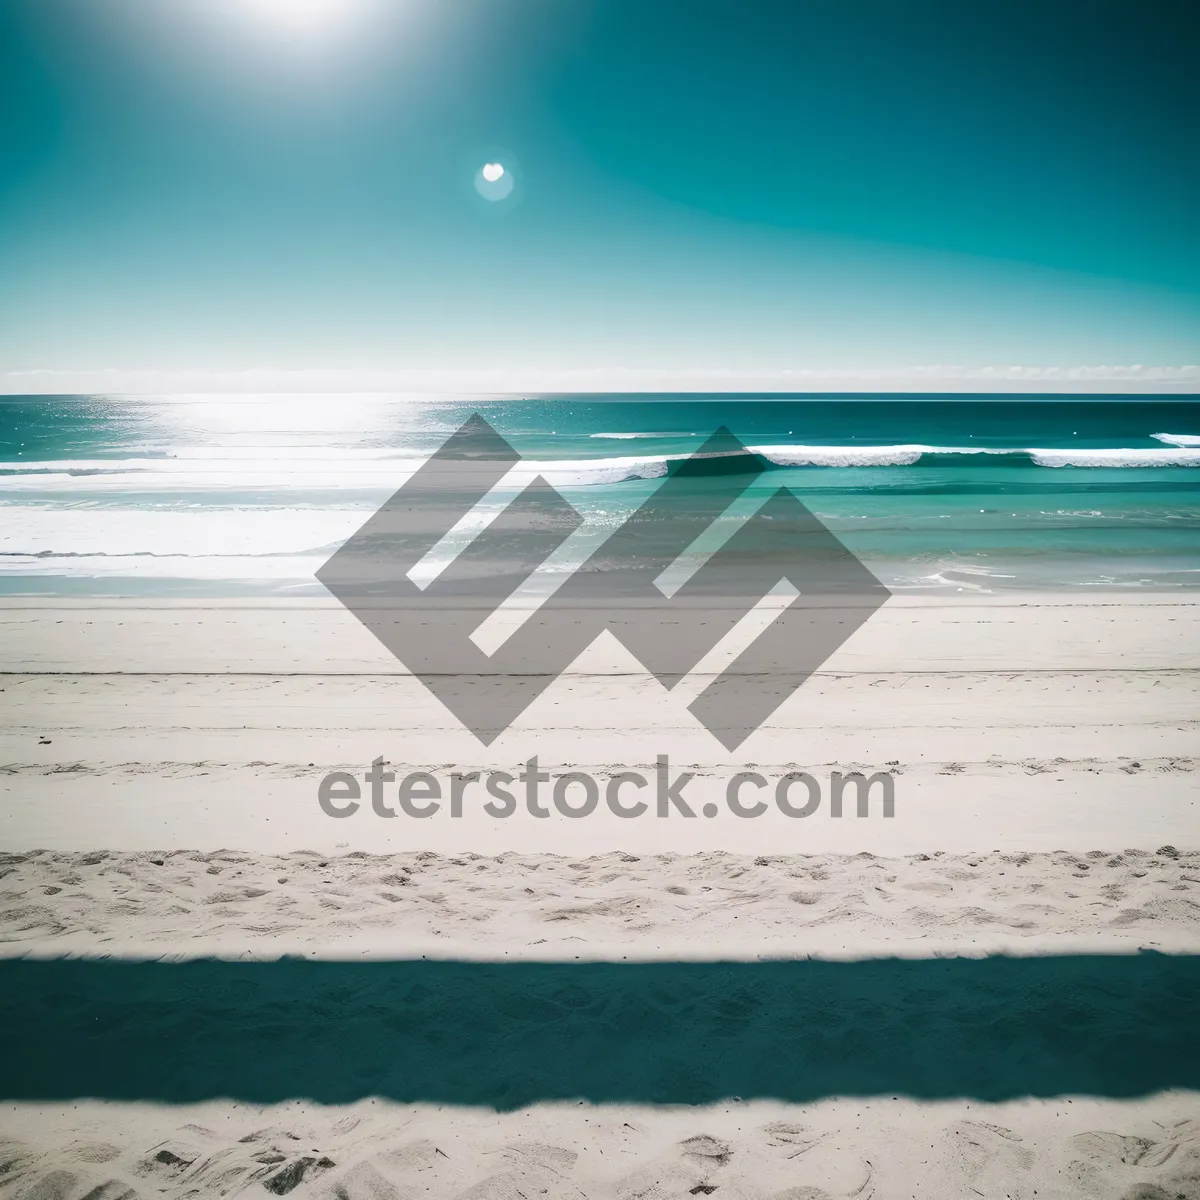 Picture of Serene Beachscape: Sun-kissed sands meet turquoise waves.